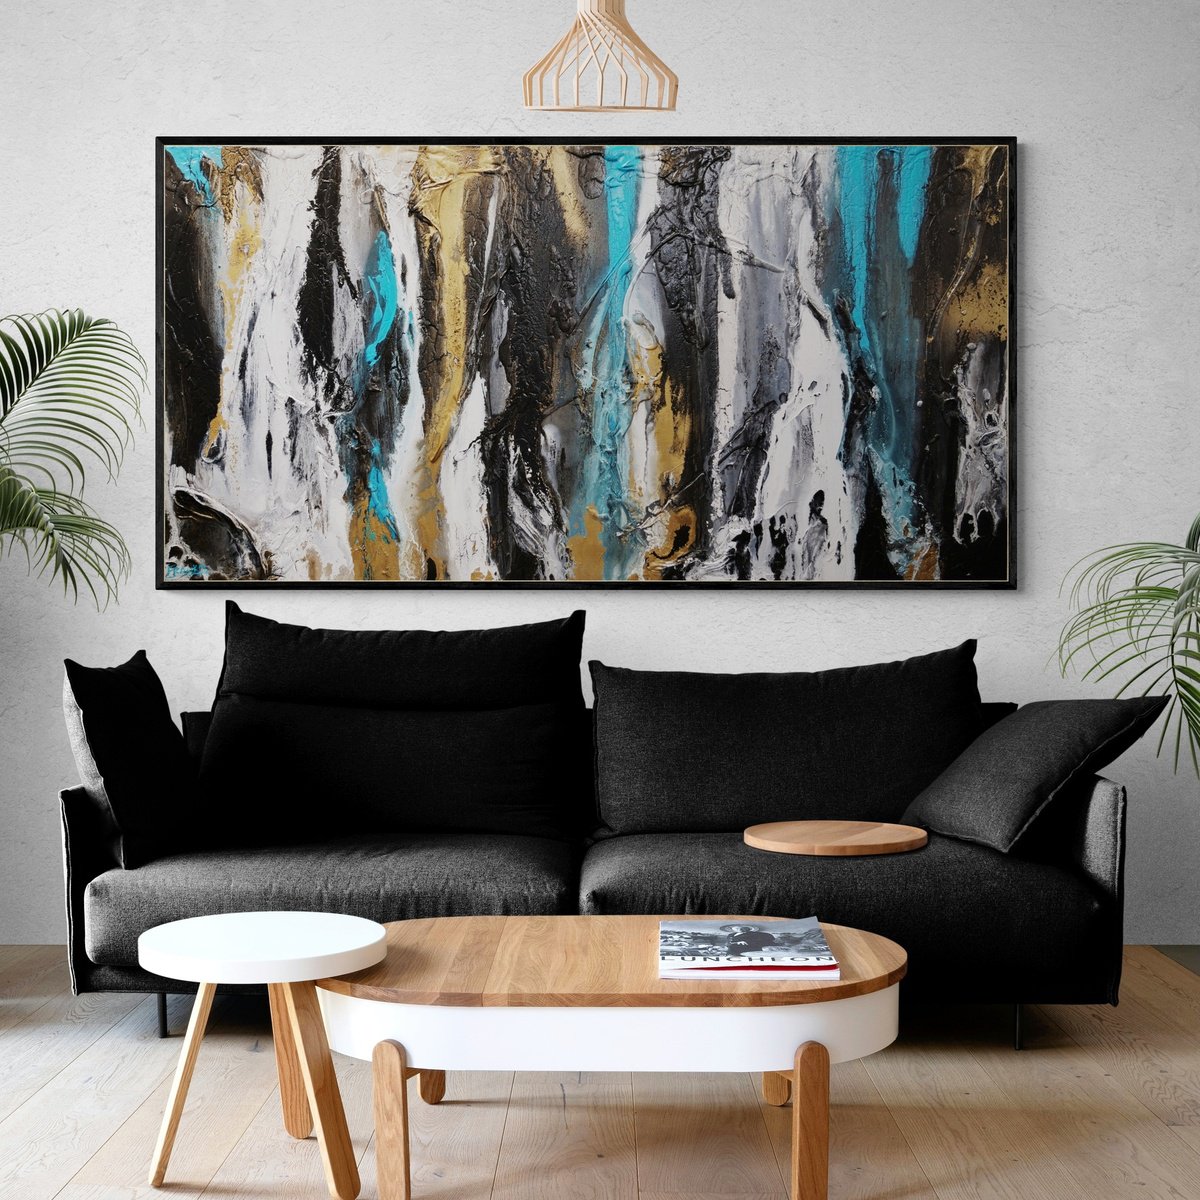 Golden Teal 190cm x 100cm Textured Abstract Art by Franko